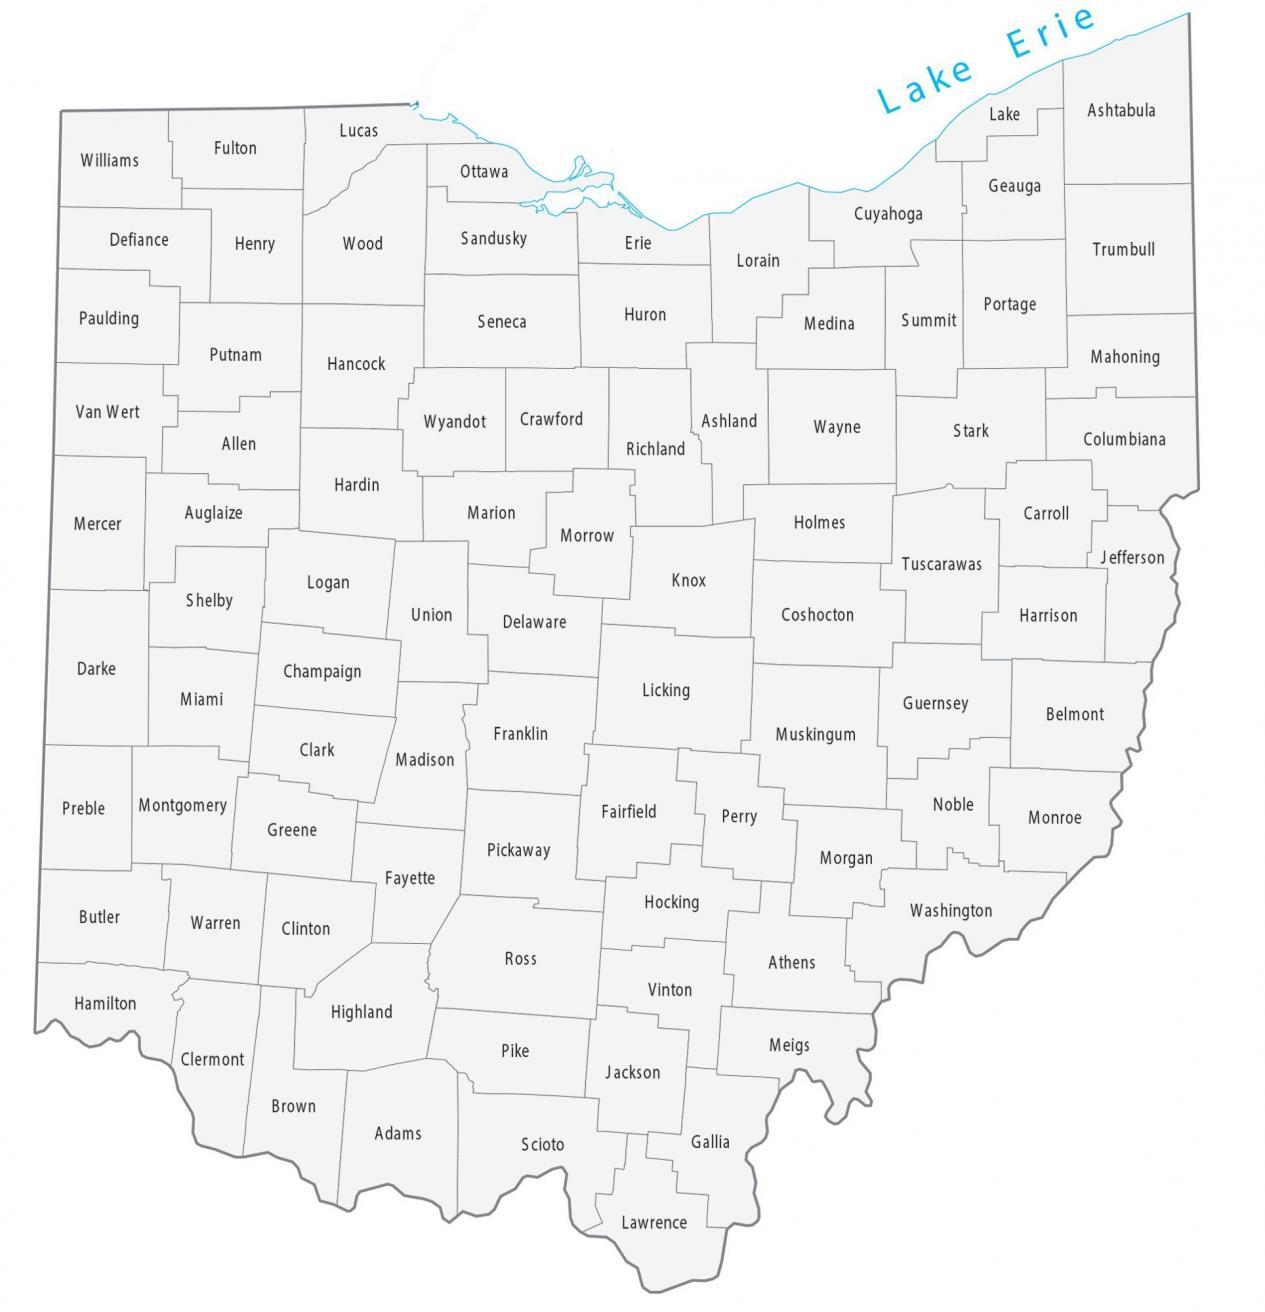 Map of Ohio - Cities and Roads - GIS Geography